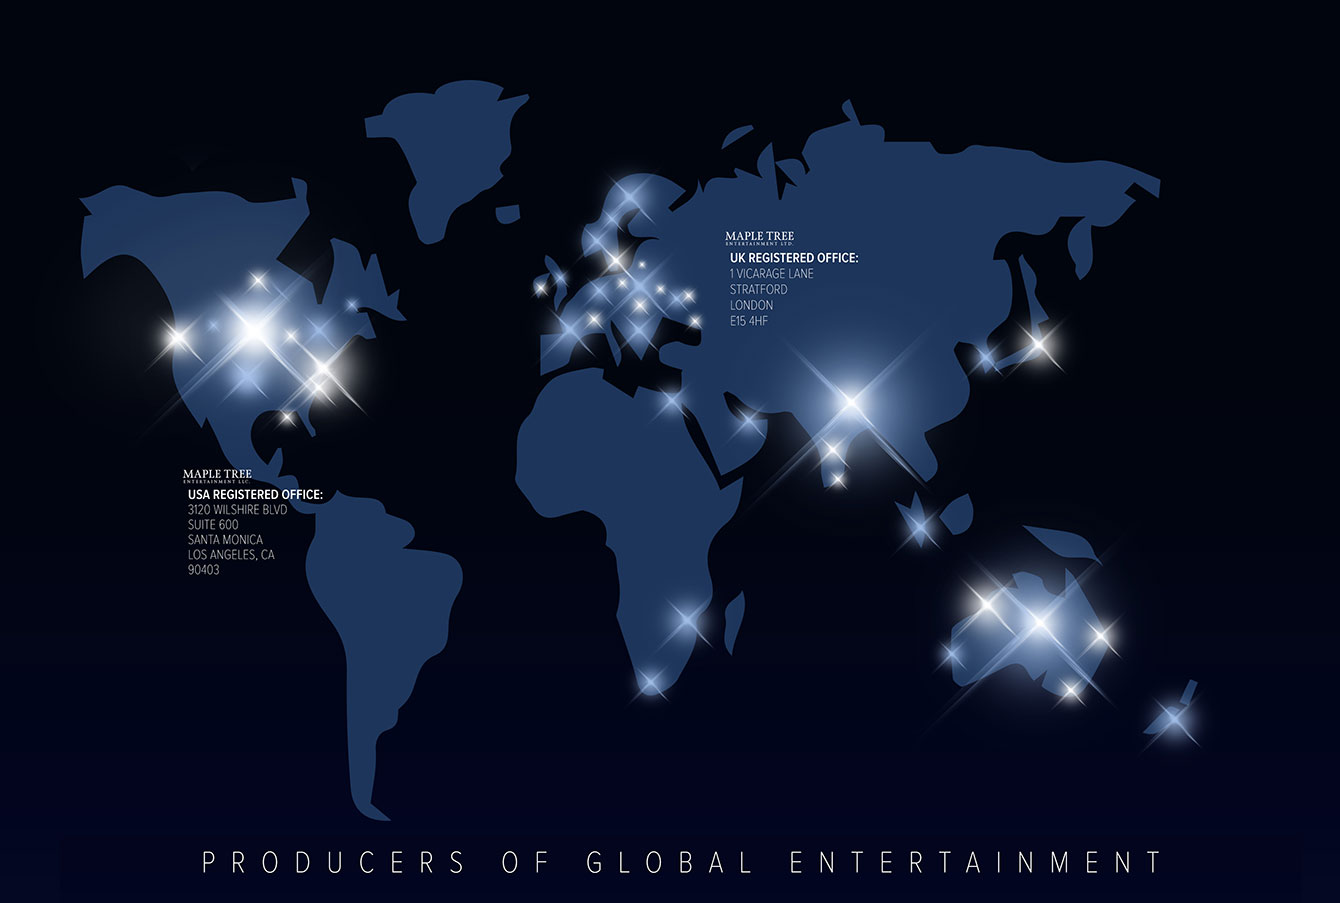 Mapletree Entertainment - Global locations